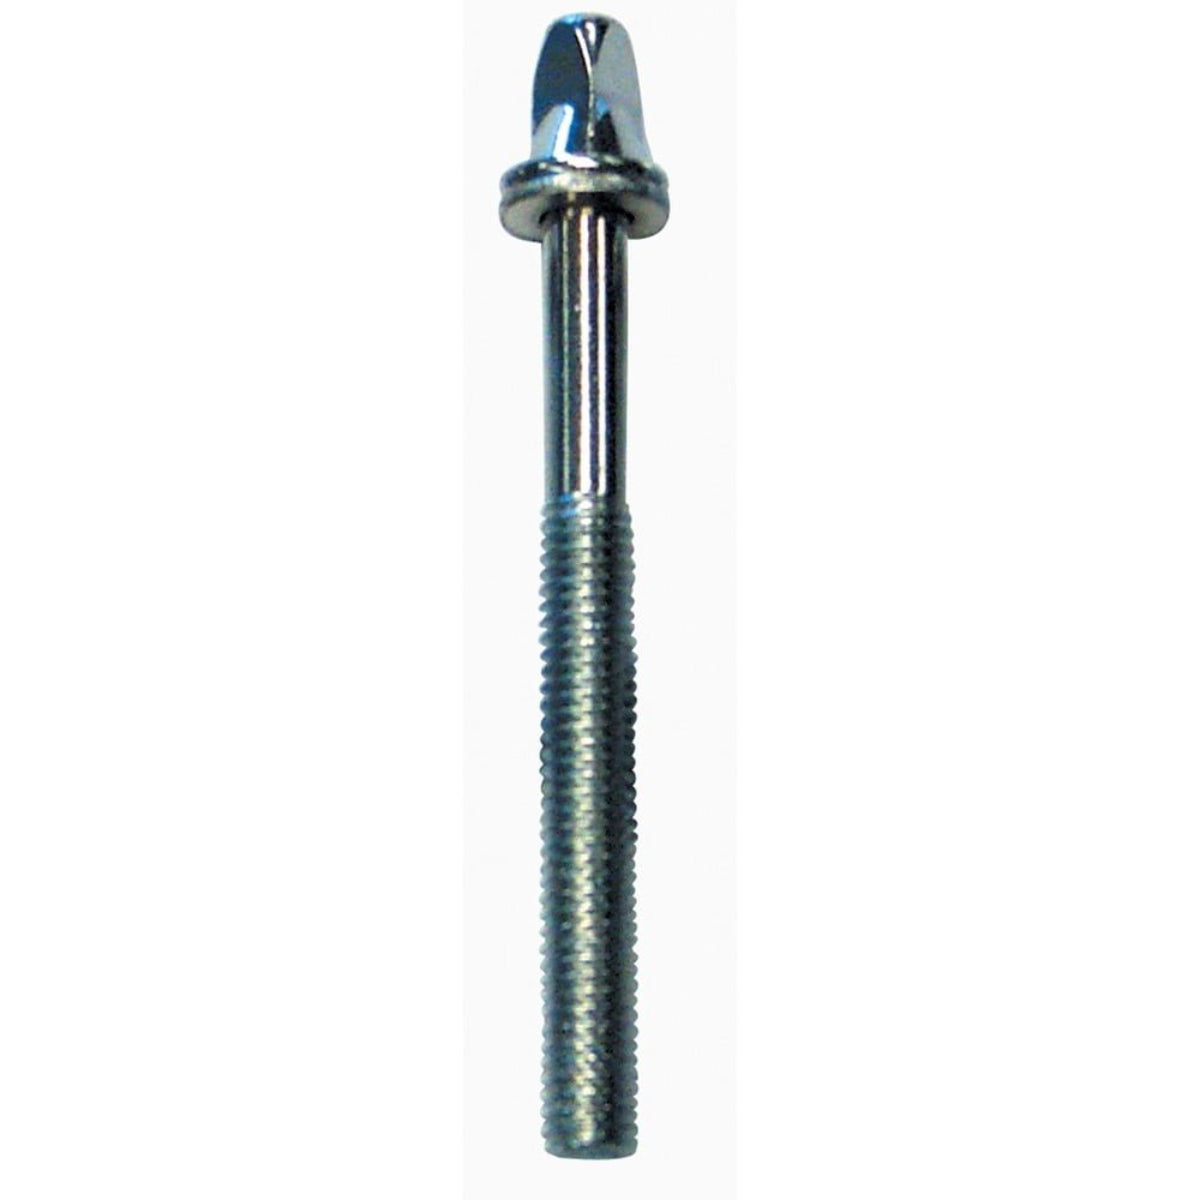 DT221 Tension Rod and Washer 60mm - Pack of 5